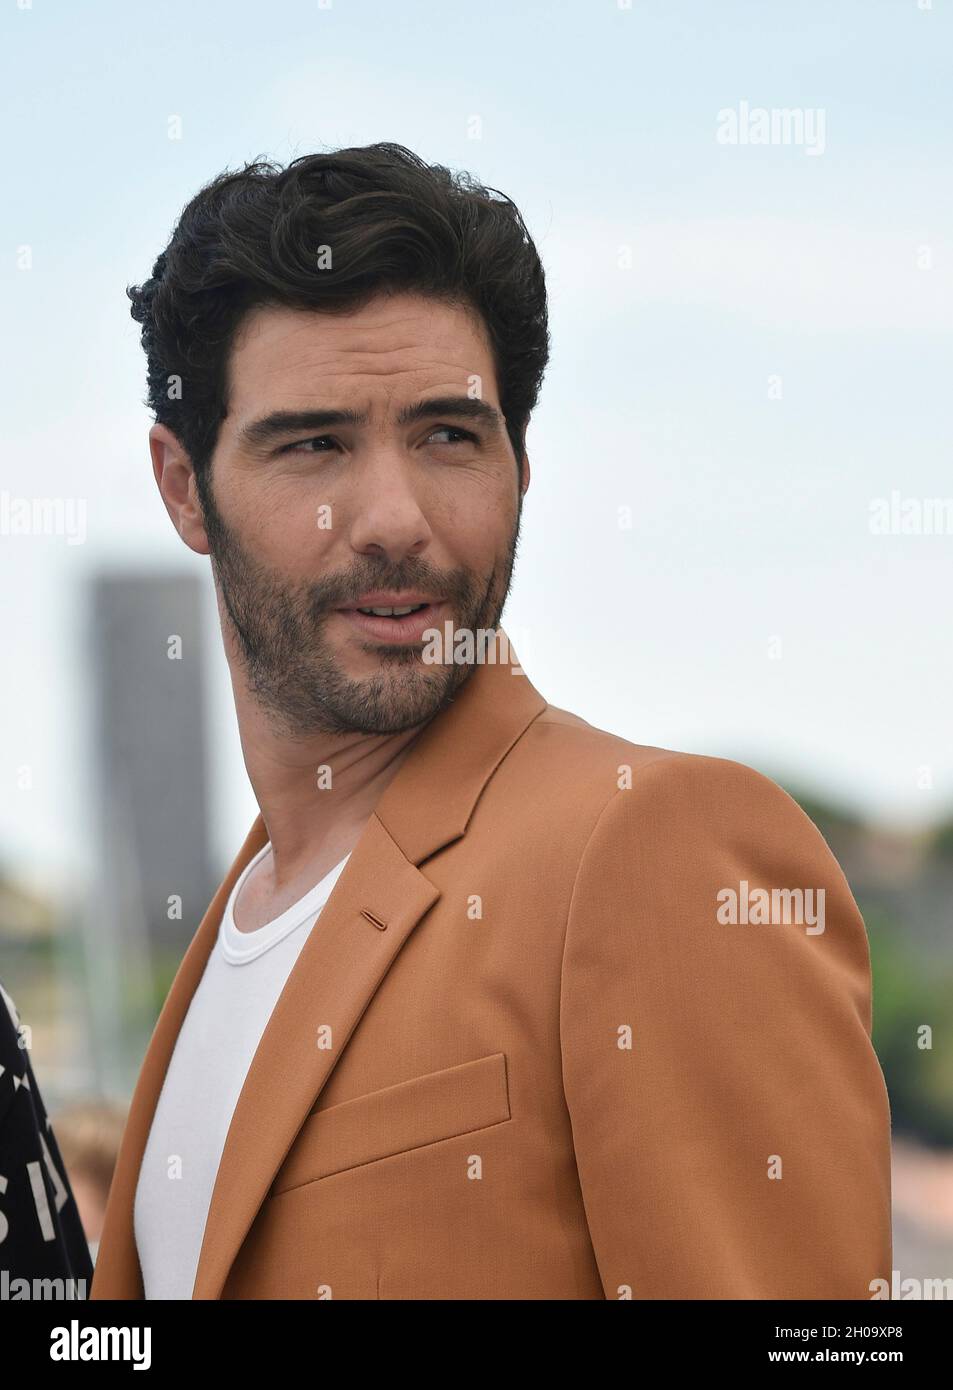 74th edition of the Cannes Film Festival: Tahar Rahim posing during a photocall with the official jury members of the Cannes Film Festival, on July 06 Stock Photo